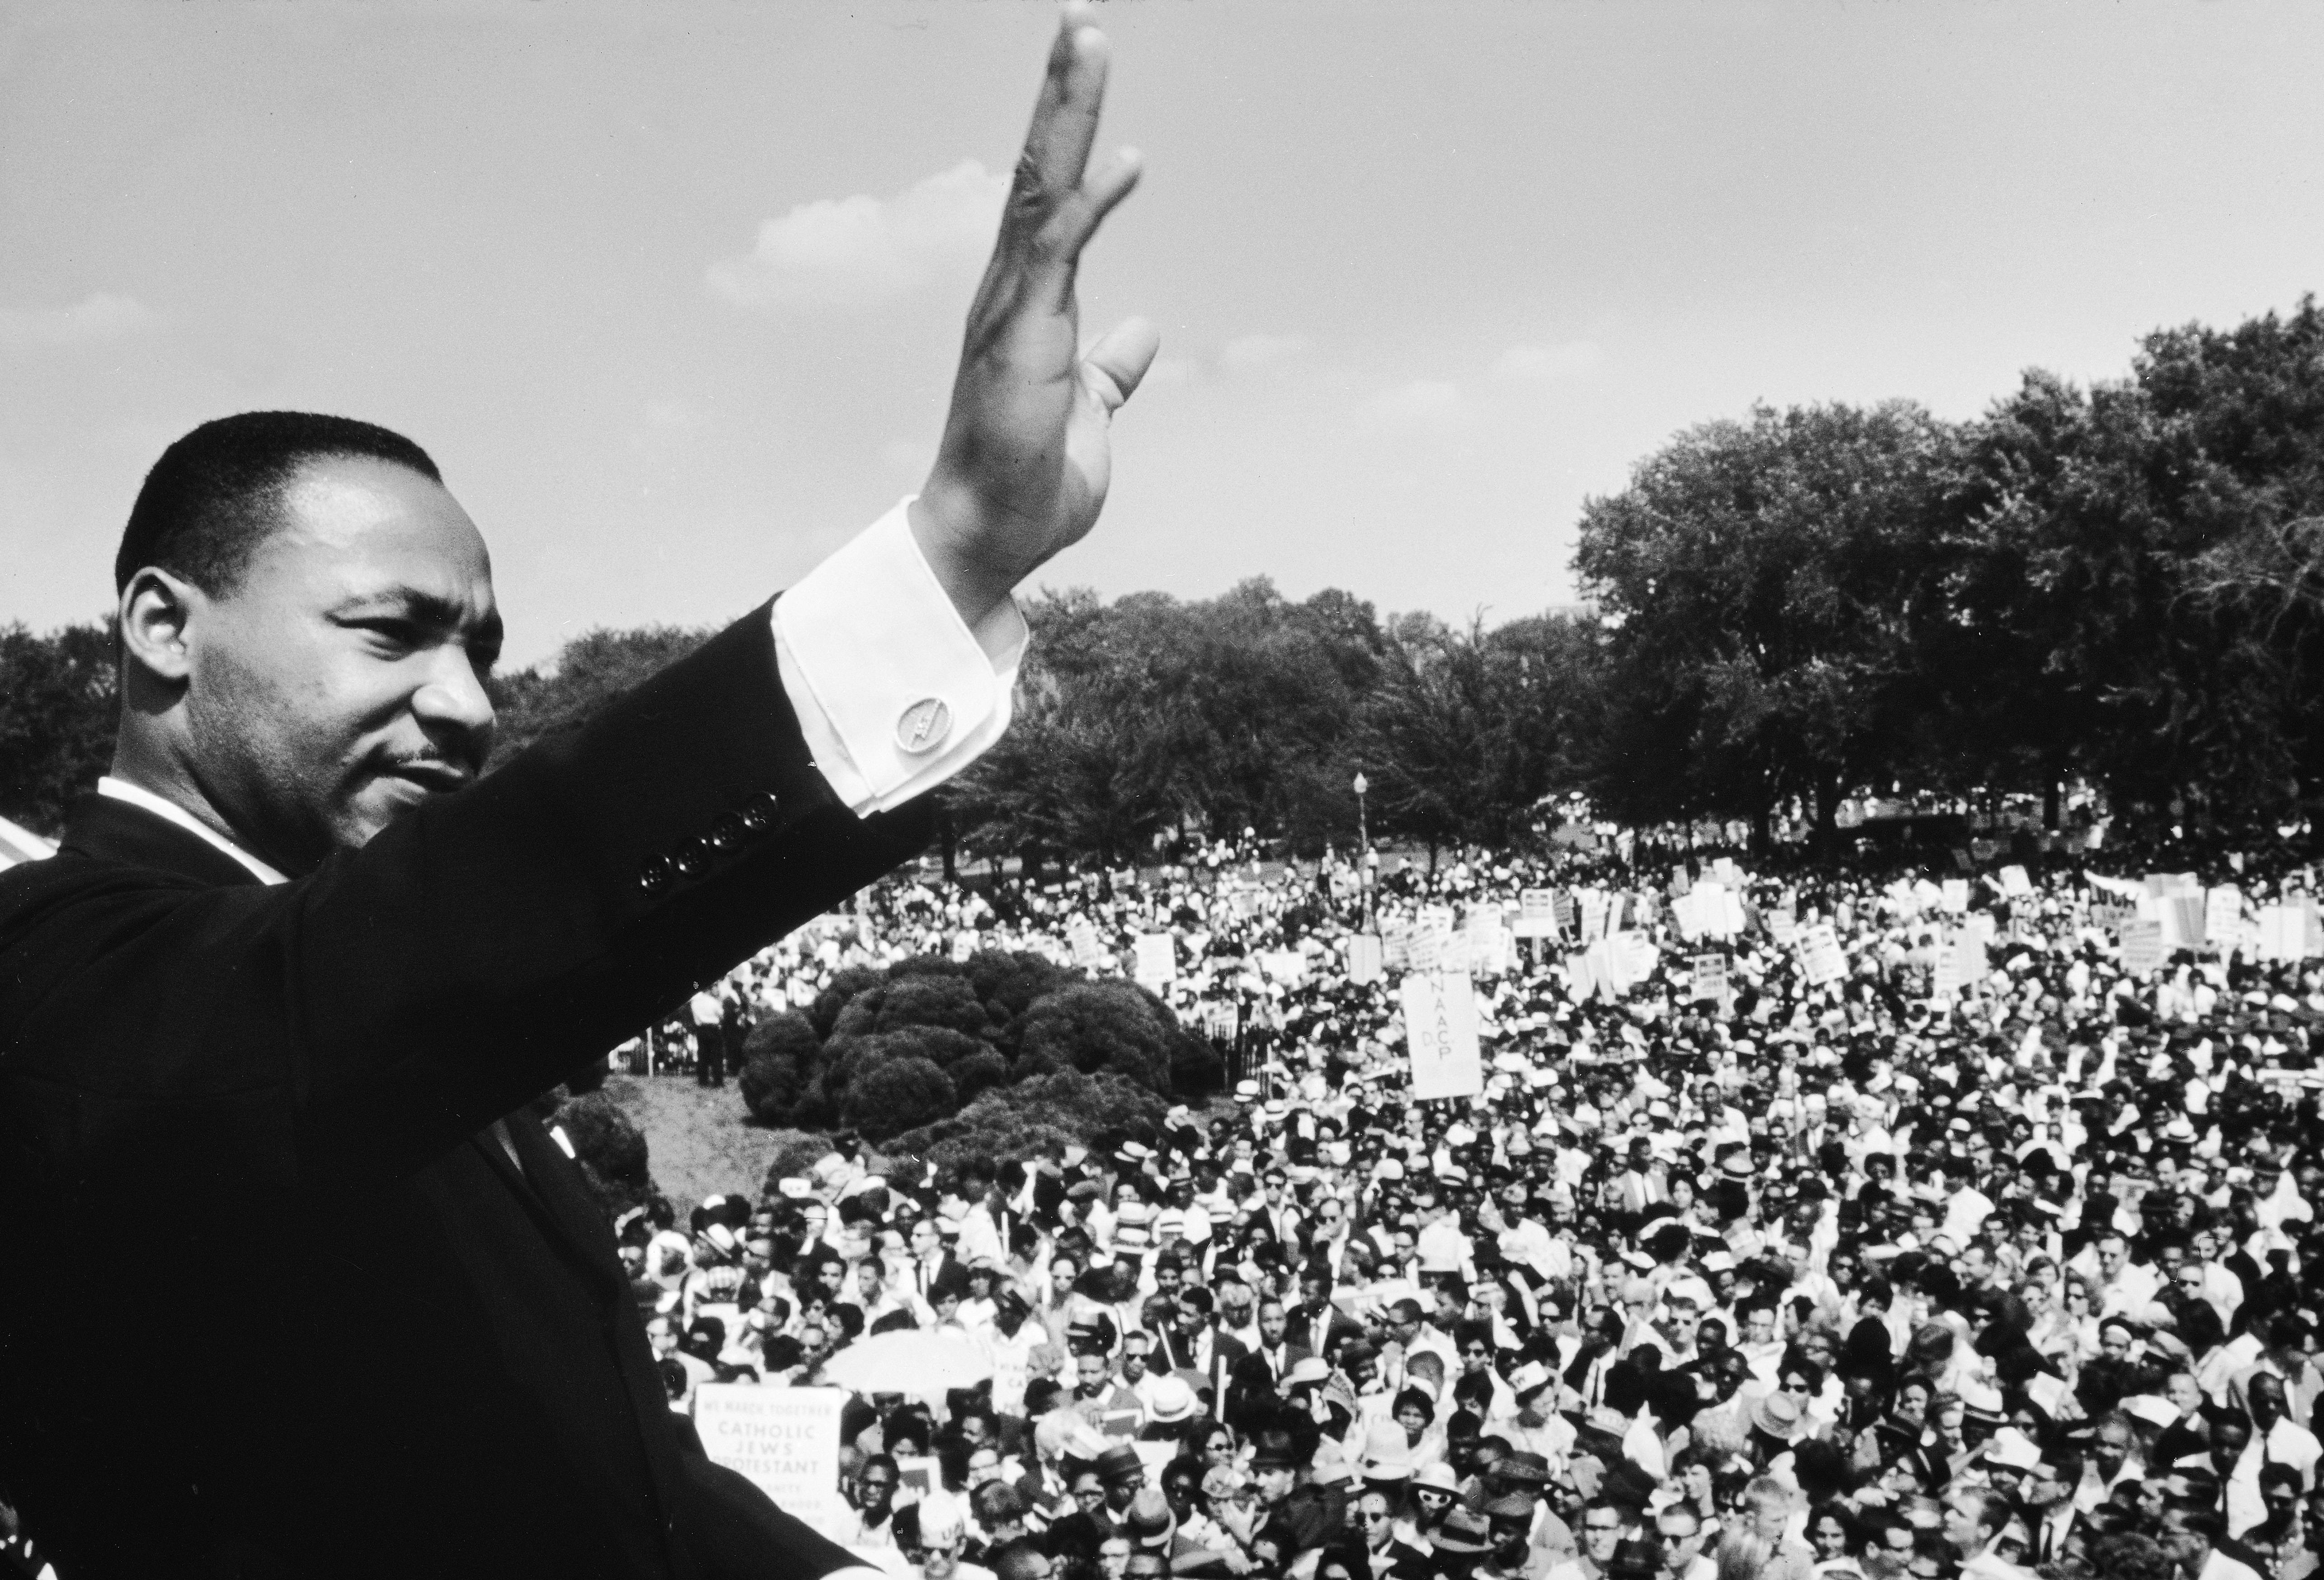 UNITED STATES - AUGUST 28:  Dr. Martin Luther King Jr. addressing crowd of demonstrators outside the Lincoln Memorial during the March on Washington for Jobs and Freedom.  (Photo by Francis Miller/The LIFE Picture Collection via Getty Images)